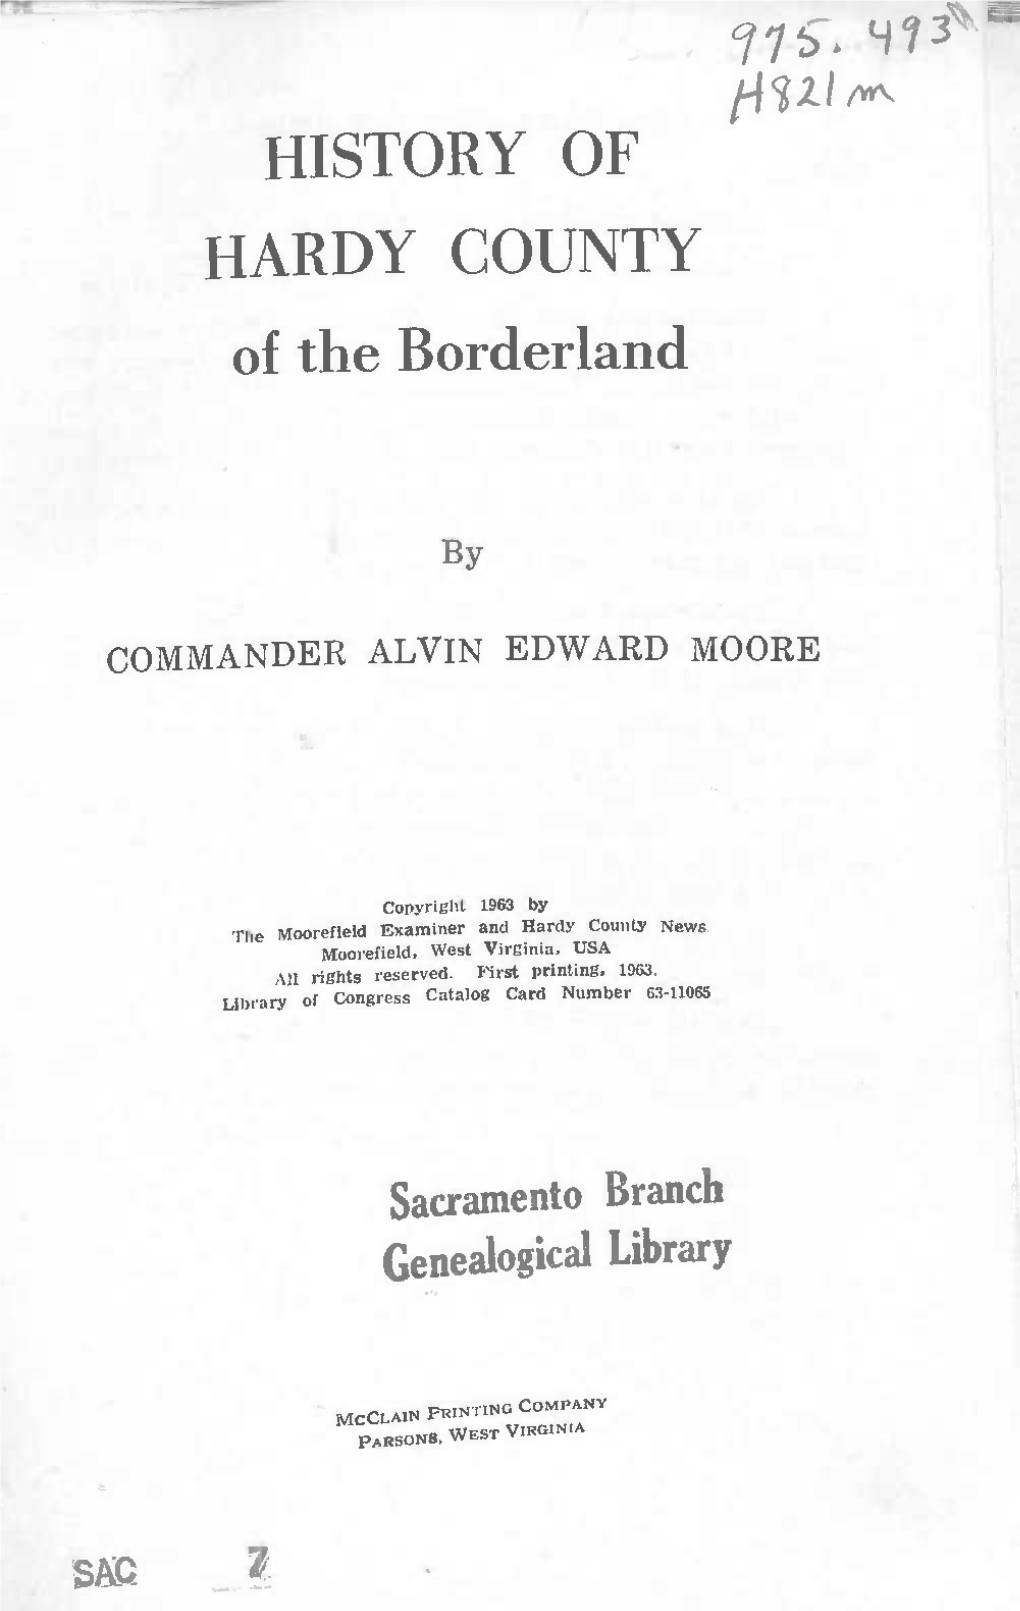 HISTORY of HARDY COUNTY of the Borderland